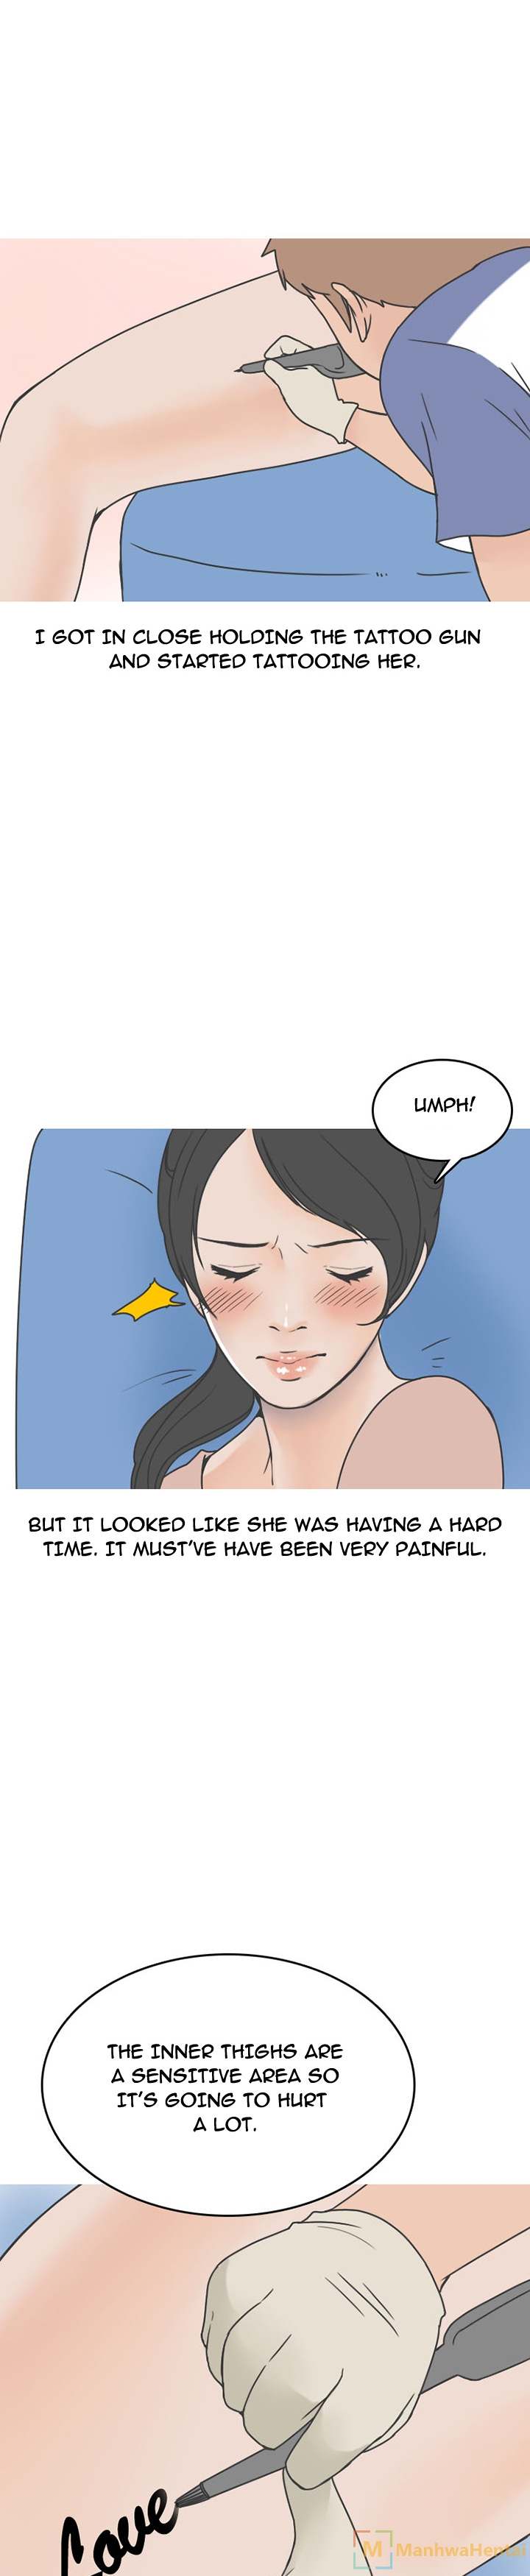 NEXT Gossip - Chapter 48 Page 2